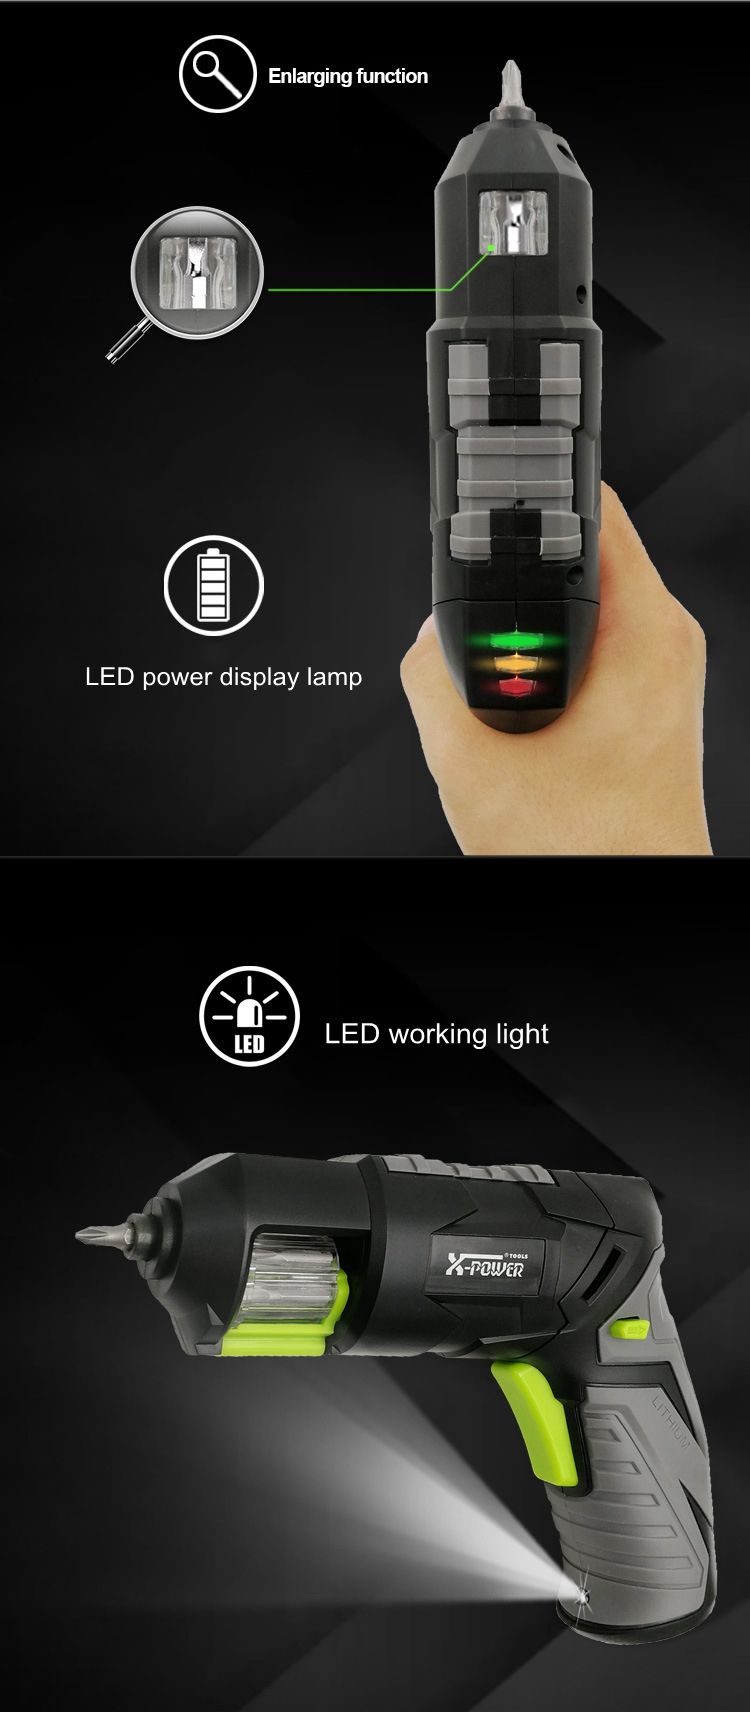 X-POWER-36V-Electric-Cordless-Screwdriver-Handhold-Li-Ion-Battery-USB-Fast-Charging-with-5-Bits-1427092